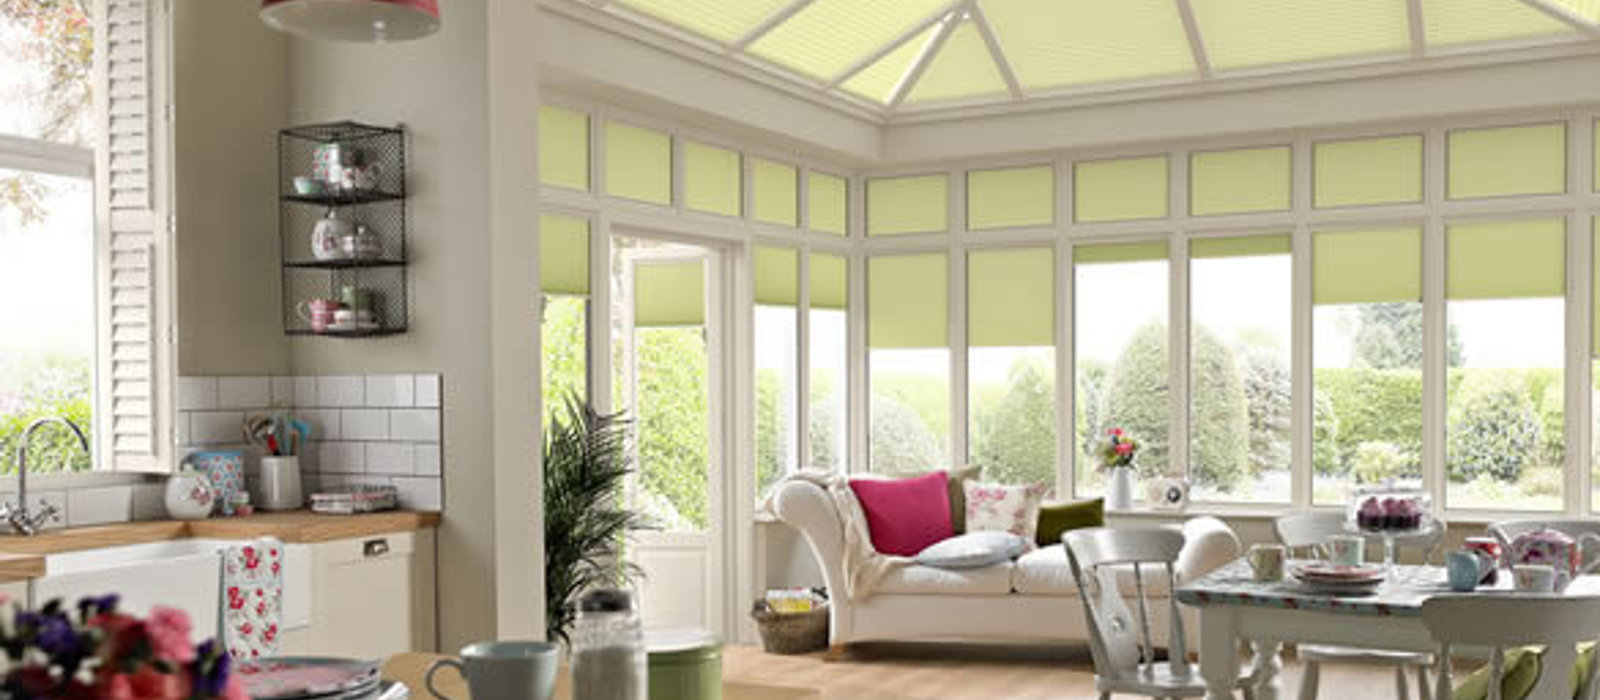 Traditional living space with large conservatory fitted with Duette roof blinds to keep the heat out